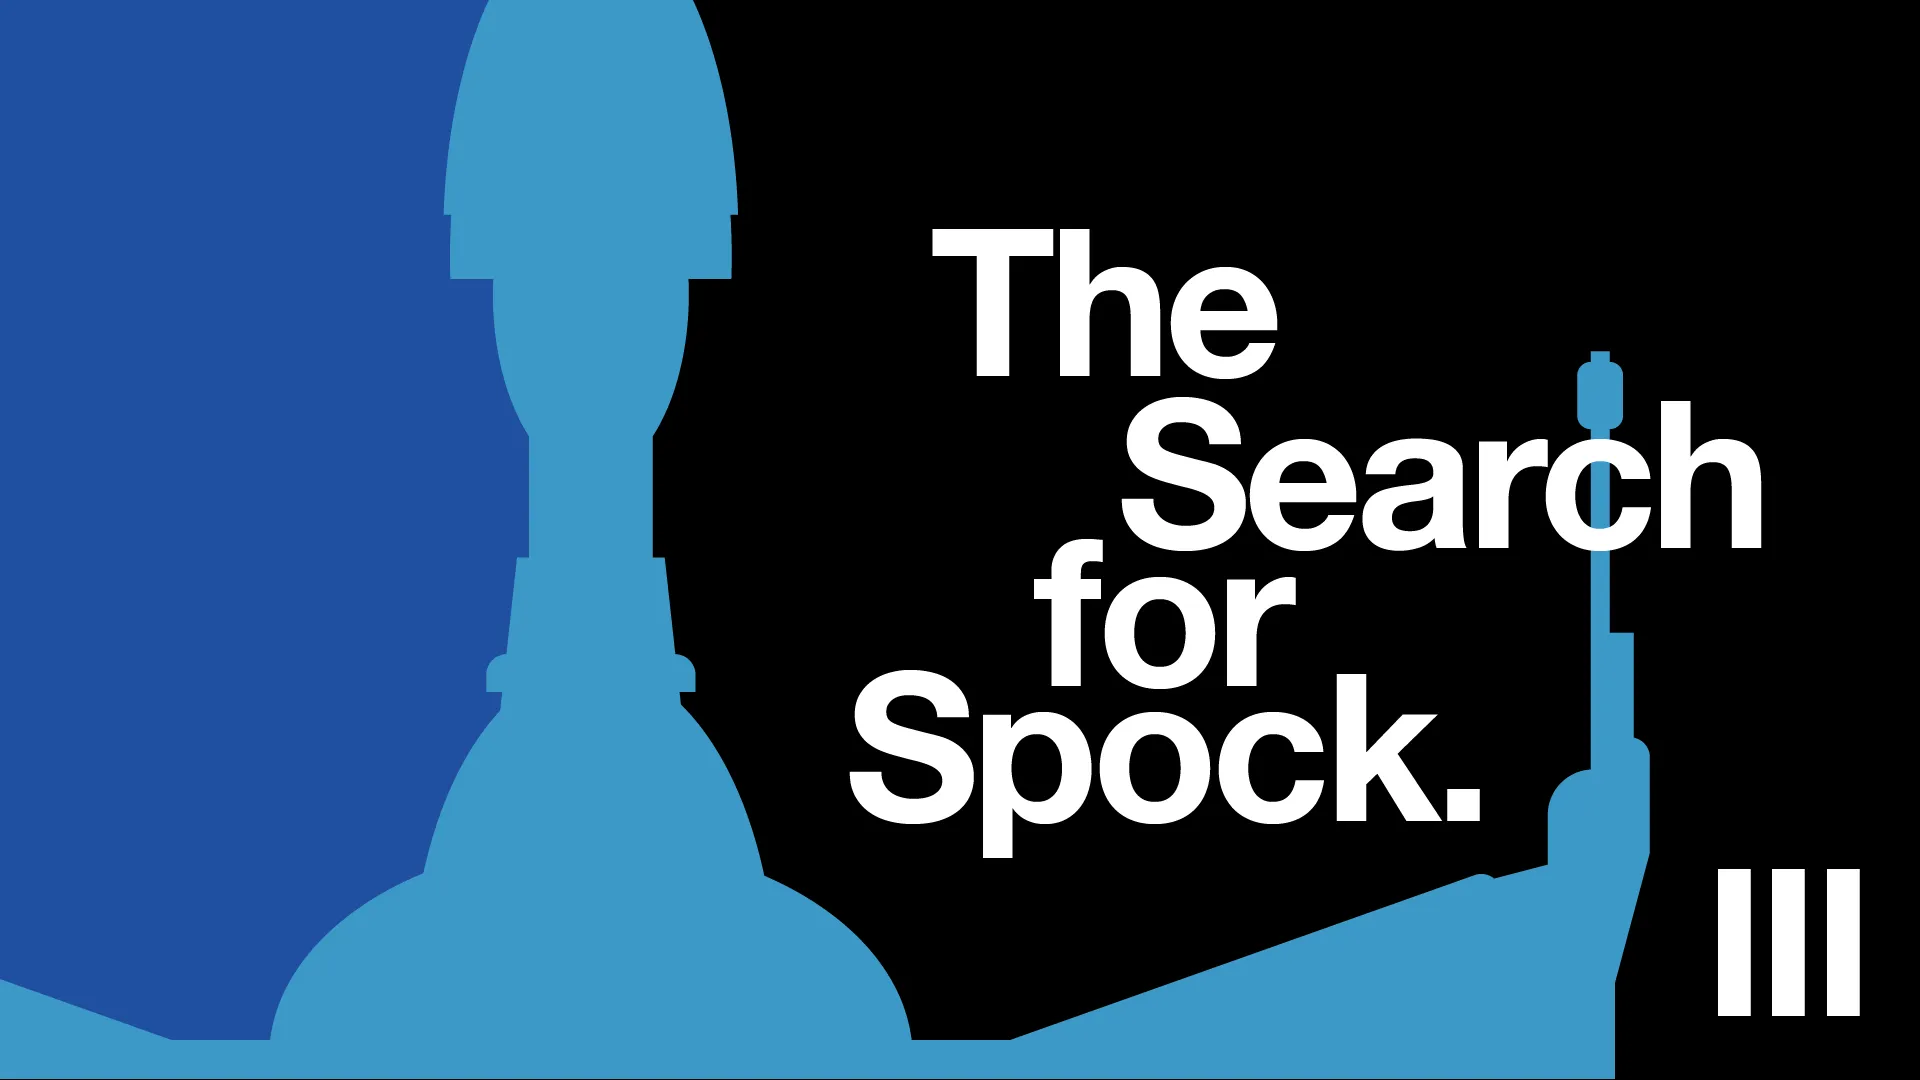 Poster for Star Trek III: The Search for Spock.